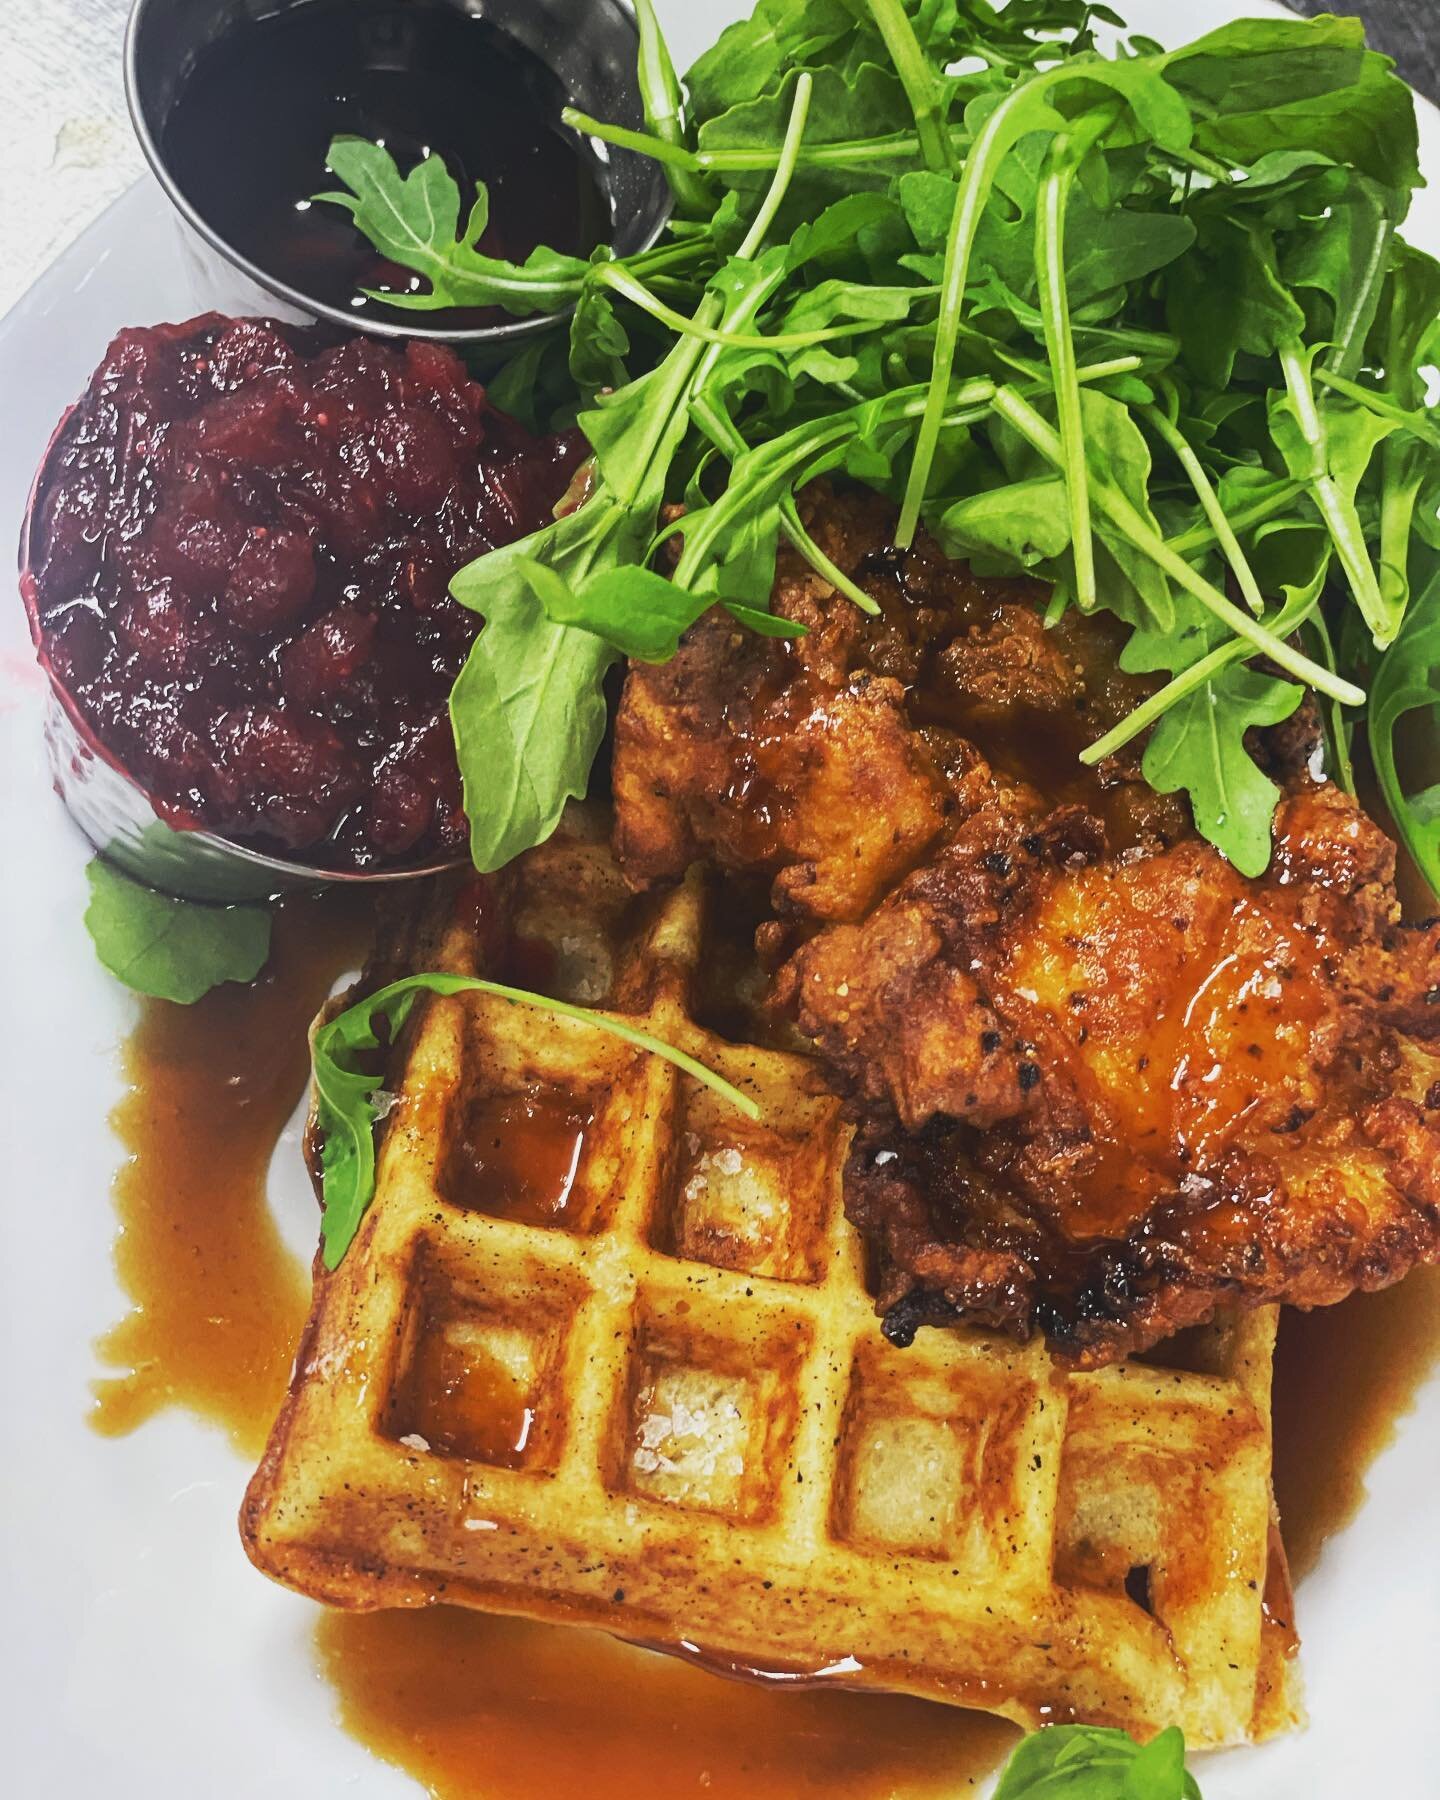 Chicken and waffles are back!!! And with apple cider sauce and fresh cranberry, arugula and sea salt for a New England touch! Come and brunch with us today til 2 pm! 

See you here! 

#sweetsuesphoenicia #catskills #sunday #sundaybrunch #chickenandwa